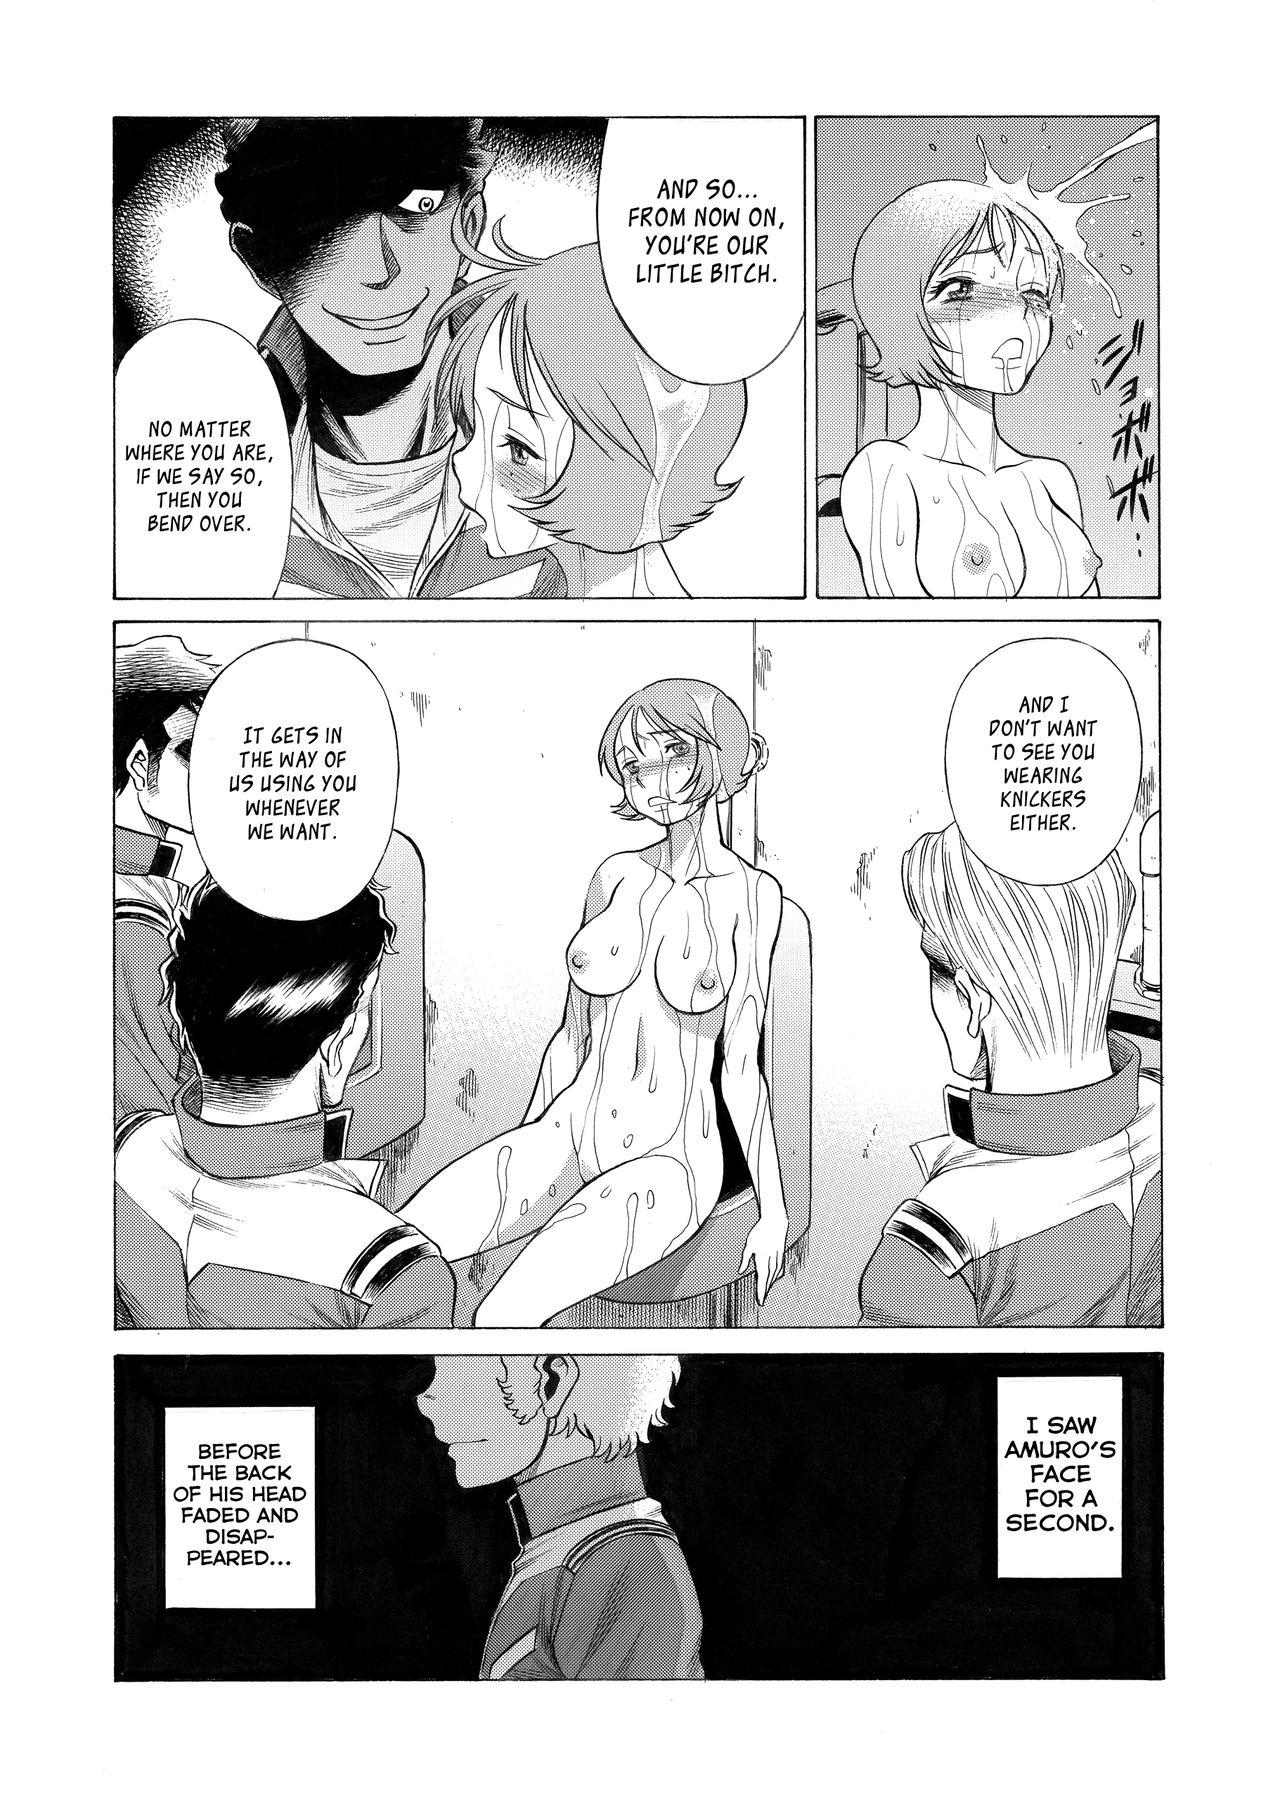 Free Real Porn Reijoh | Slave Girl - Mobile suit gundam Fucked Hard - Page 7